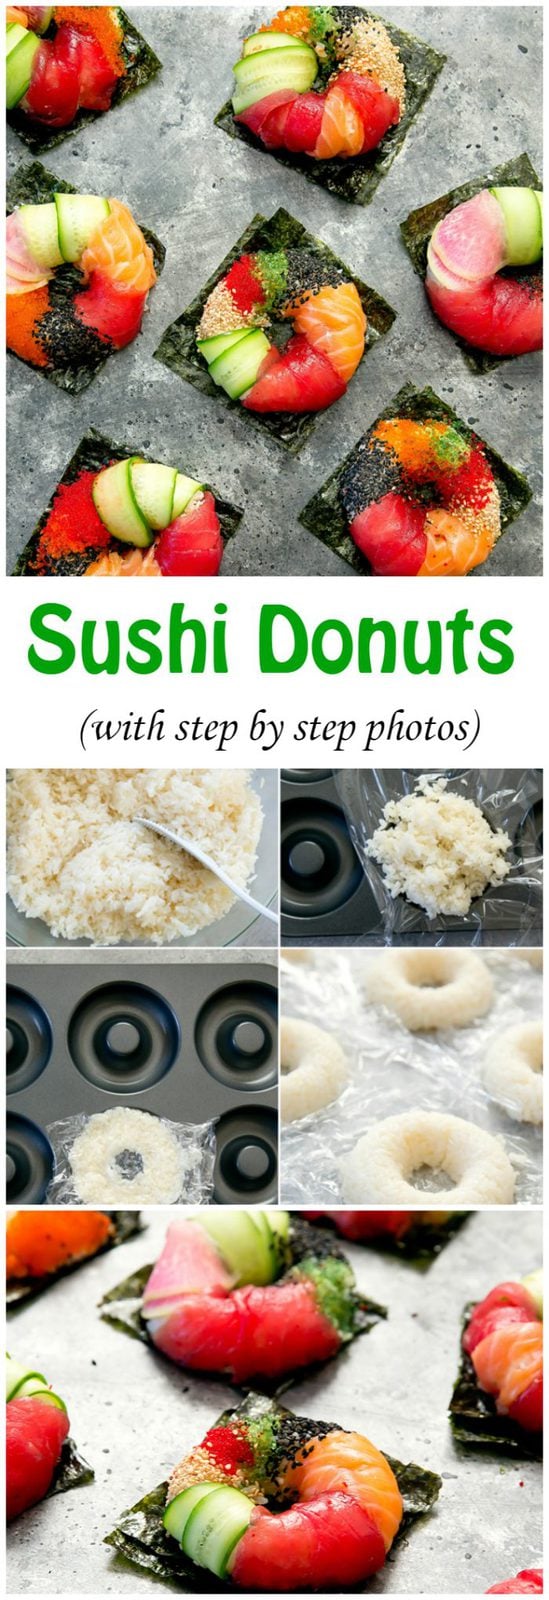 Sushi Donuts with step by step photos